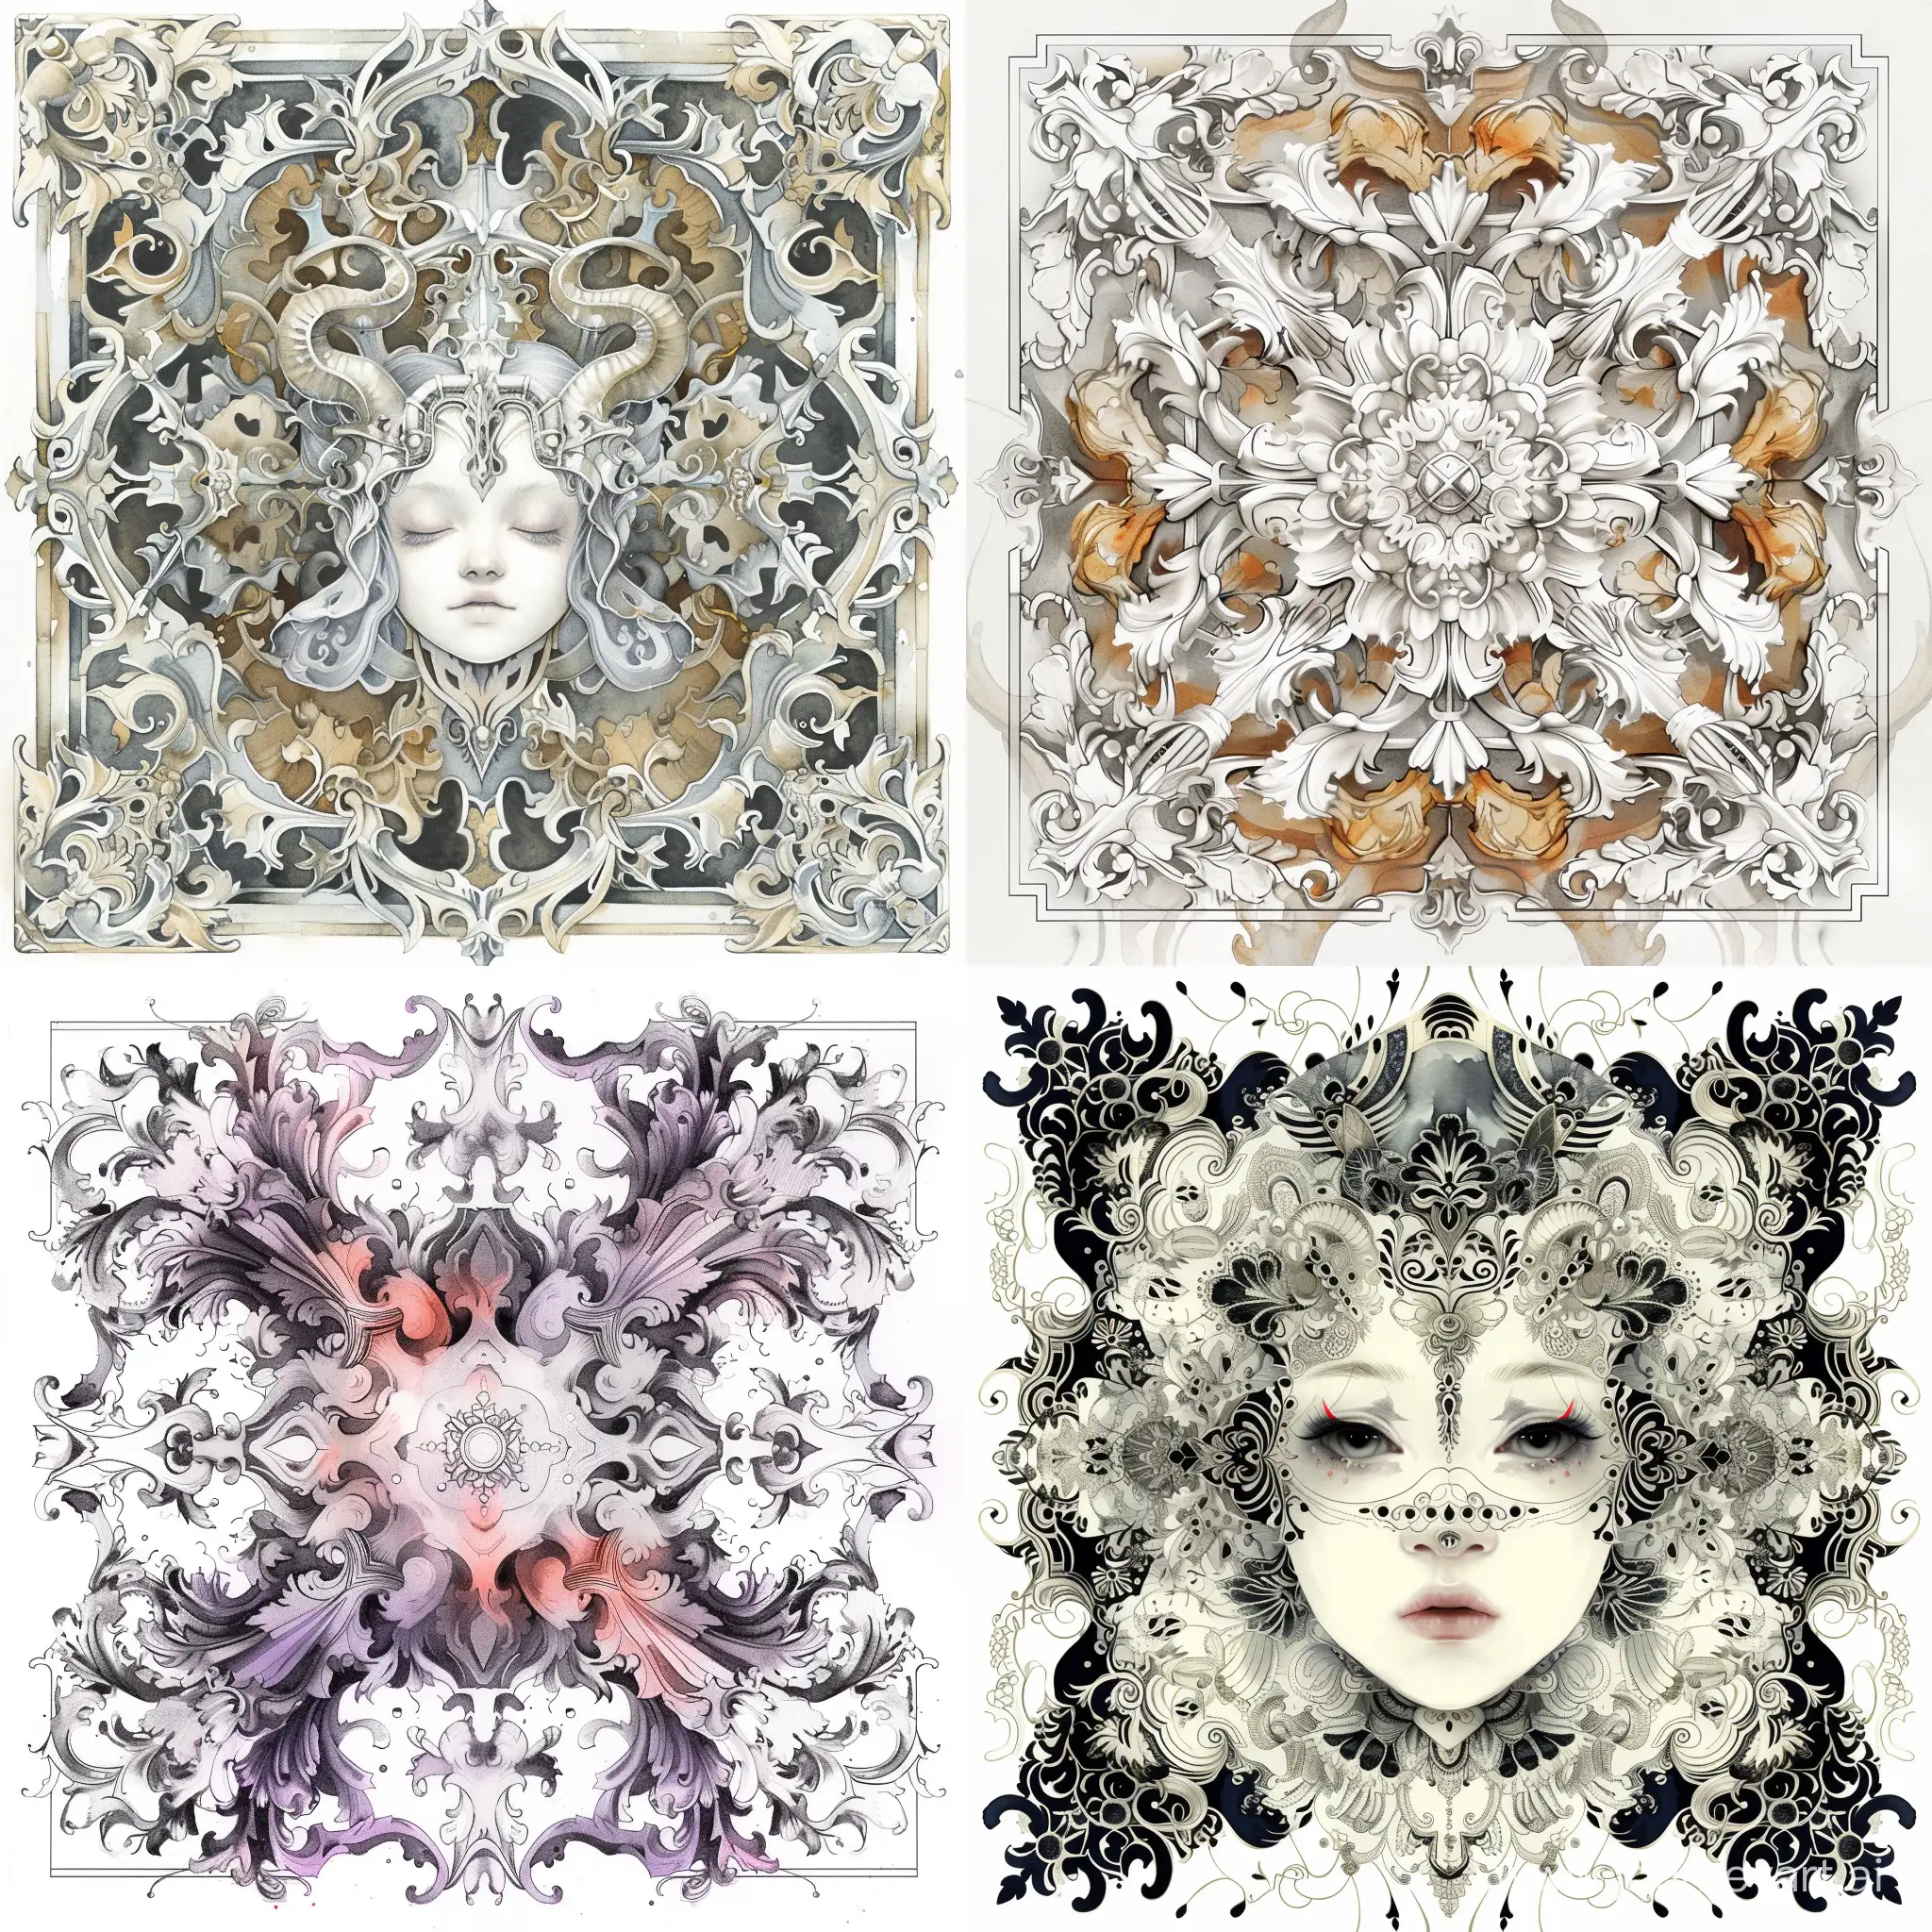 Baroque-Style-Symmetrical-Geometric-Watercolor-Illustration-with-Detailed-Caricatures-in-White-Background